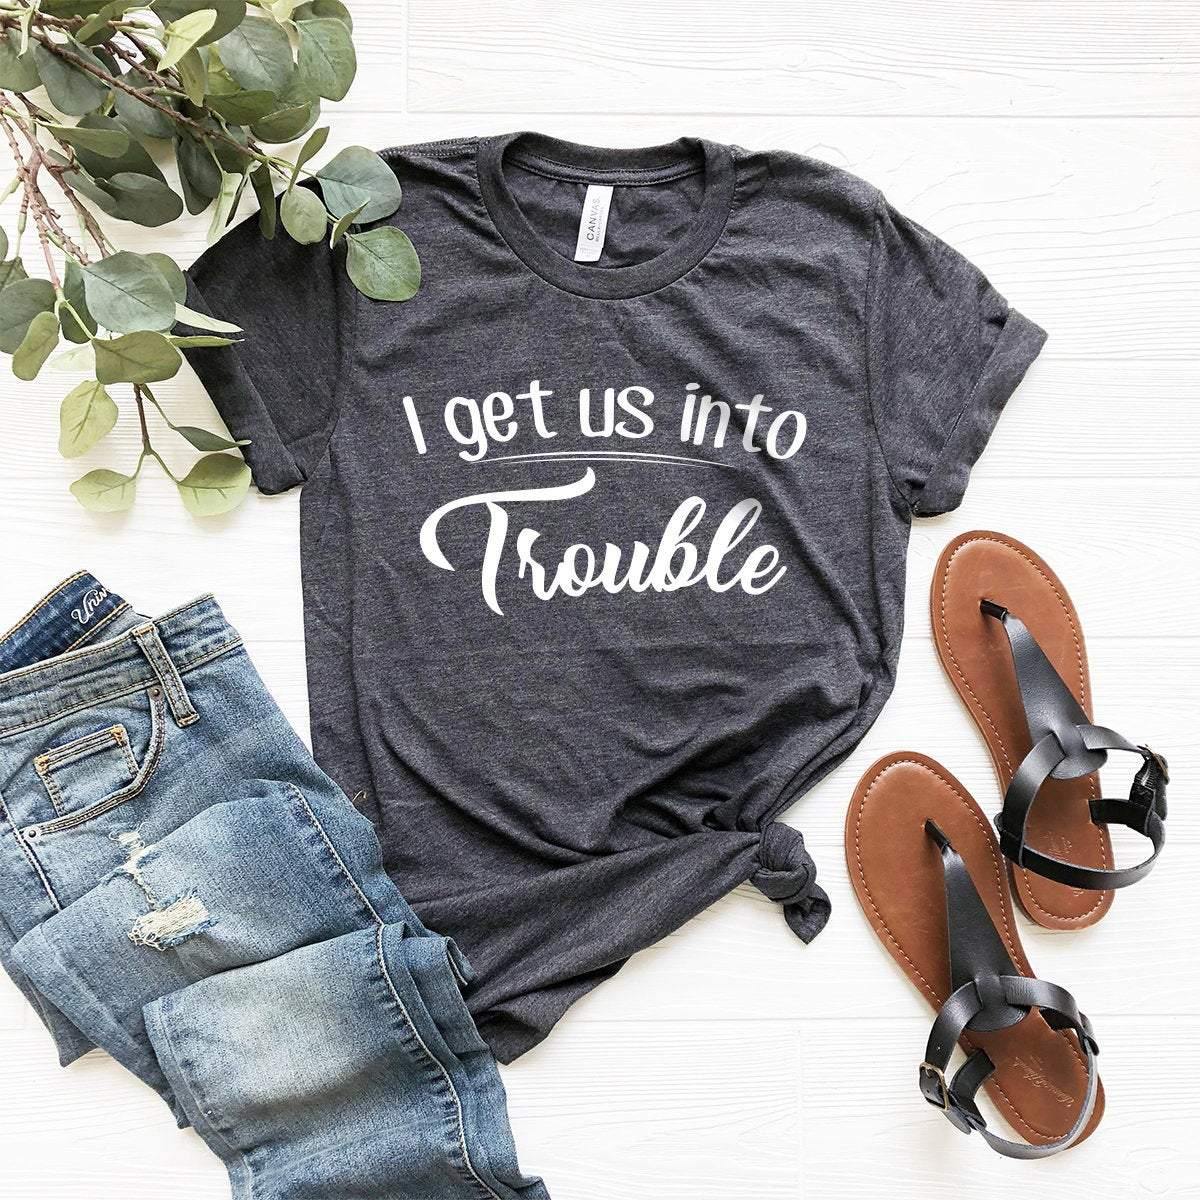 I Get Us Into Trouble Shirt, Best Friend T-Shirt, Best Friend Gift, Bestie Matching Shirt, Bestie Shirts, Gift For Bestie, BFF Tee - Fastdeliverytees.com